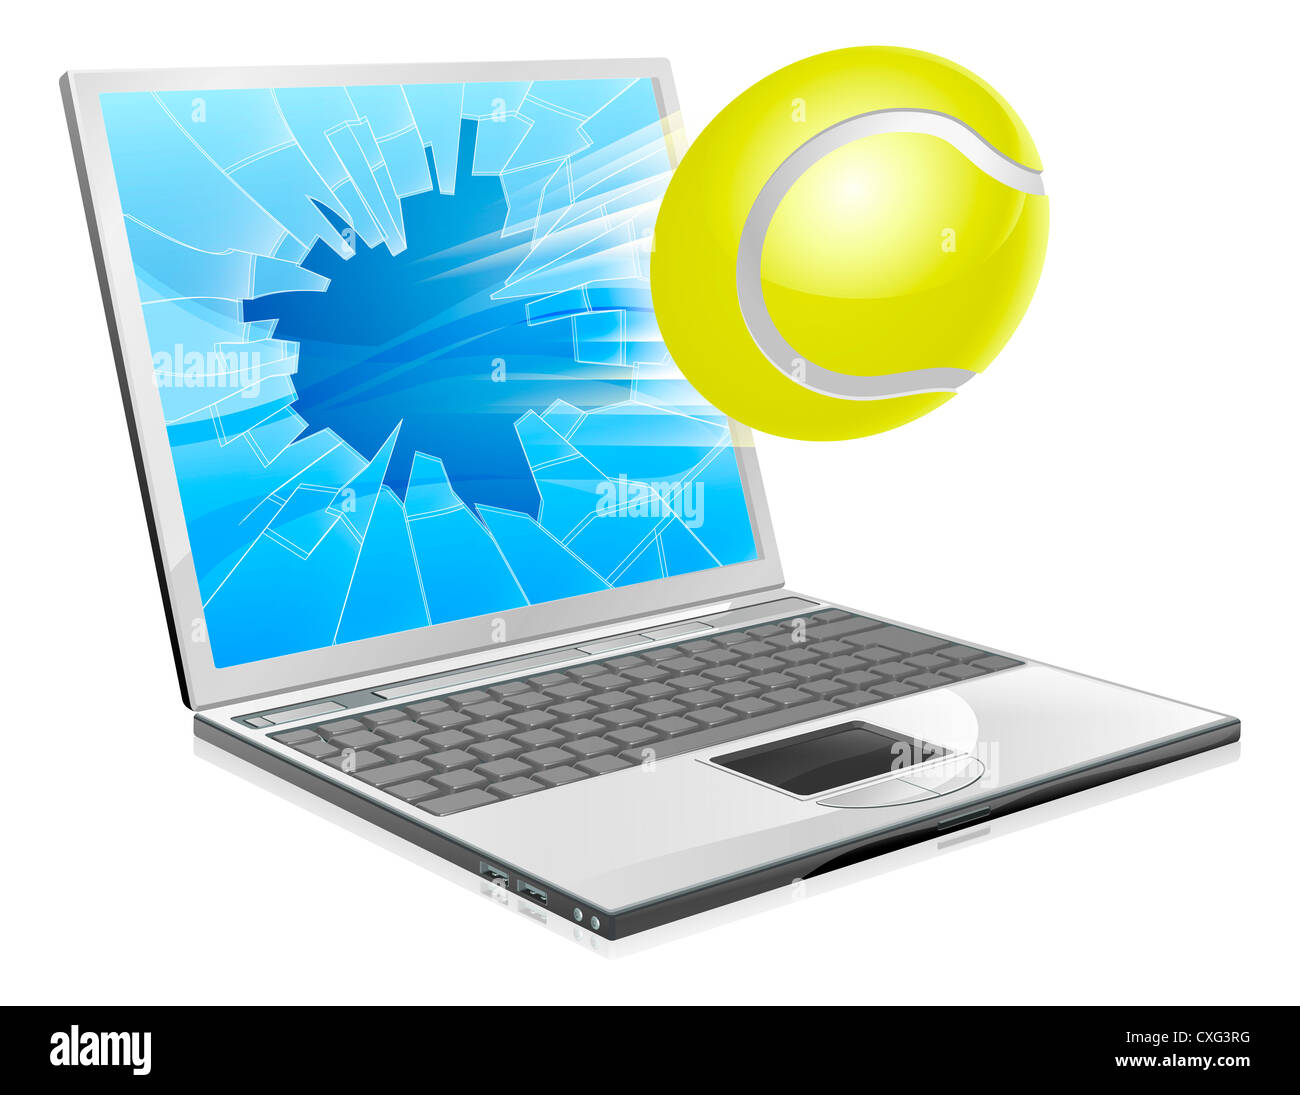 Illustration of a tennis ball flying out of a broken laptop computer screen Stock Photo